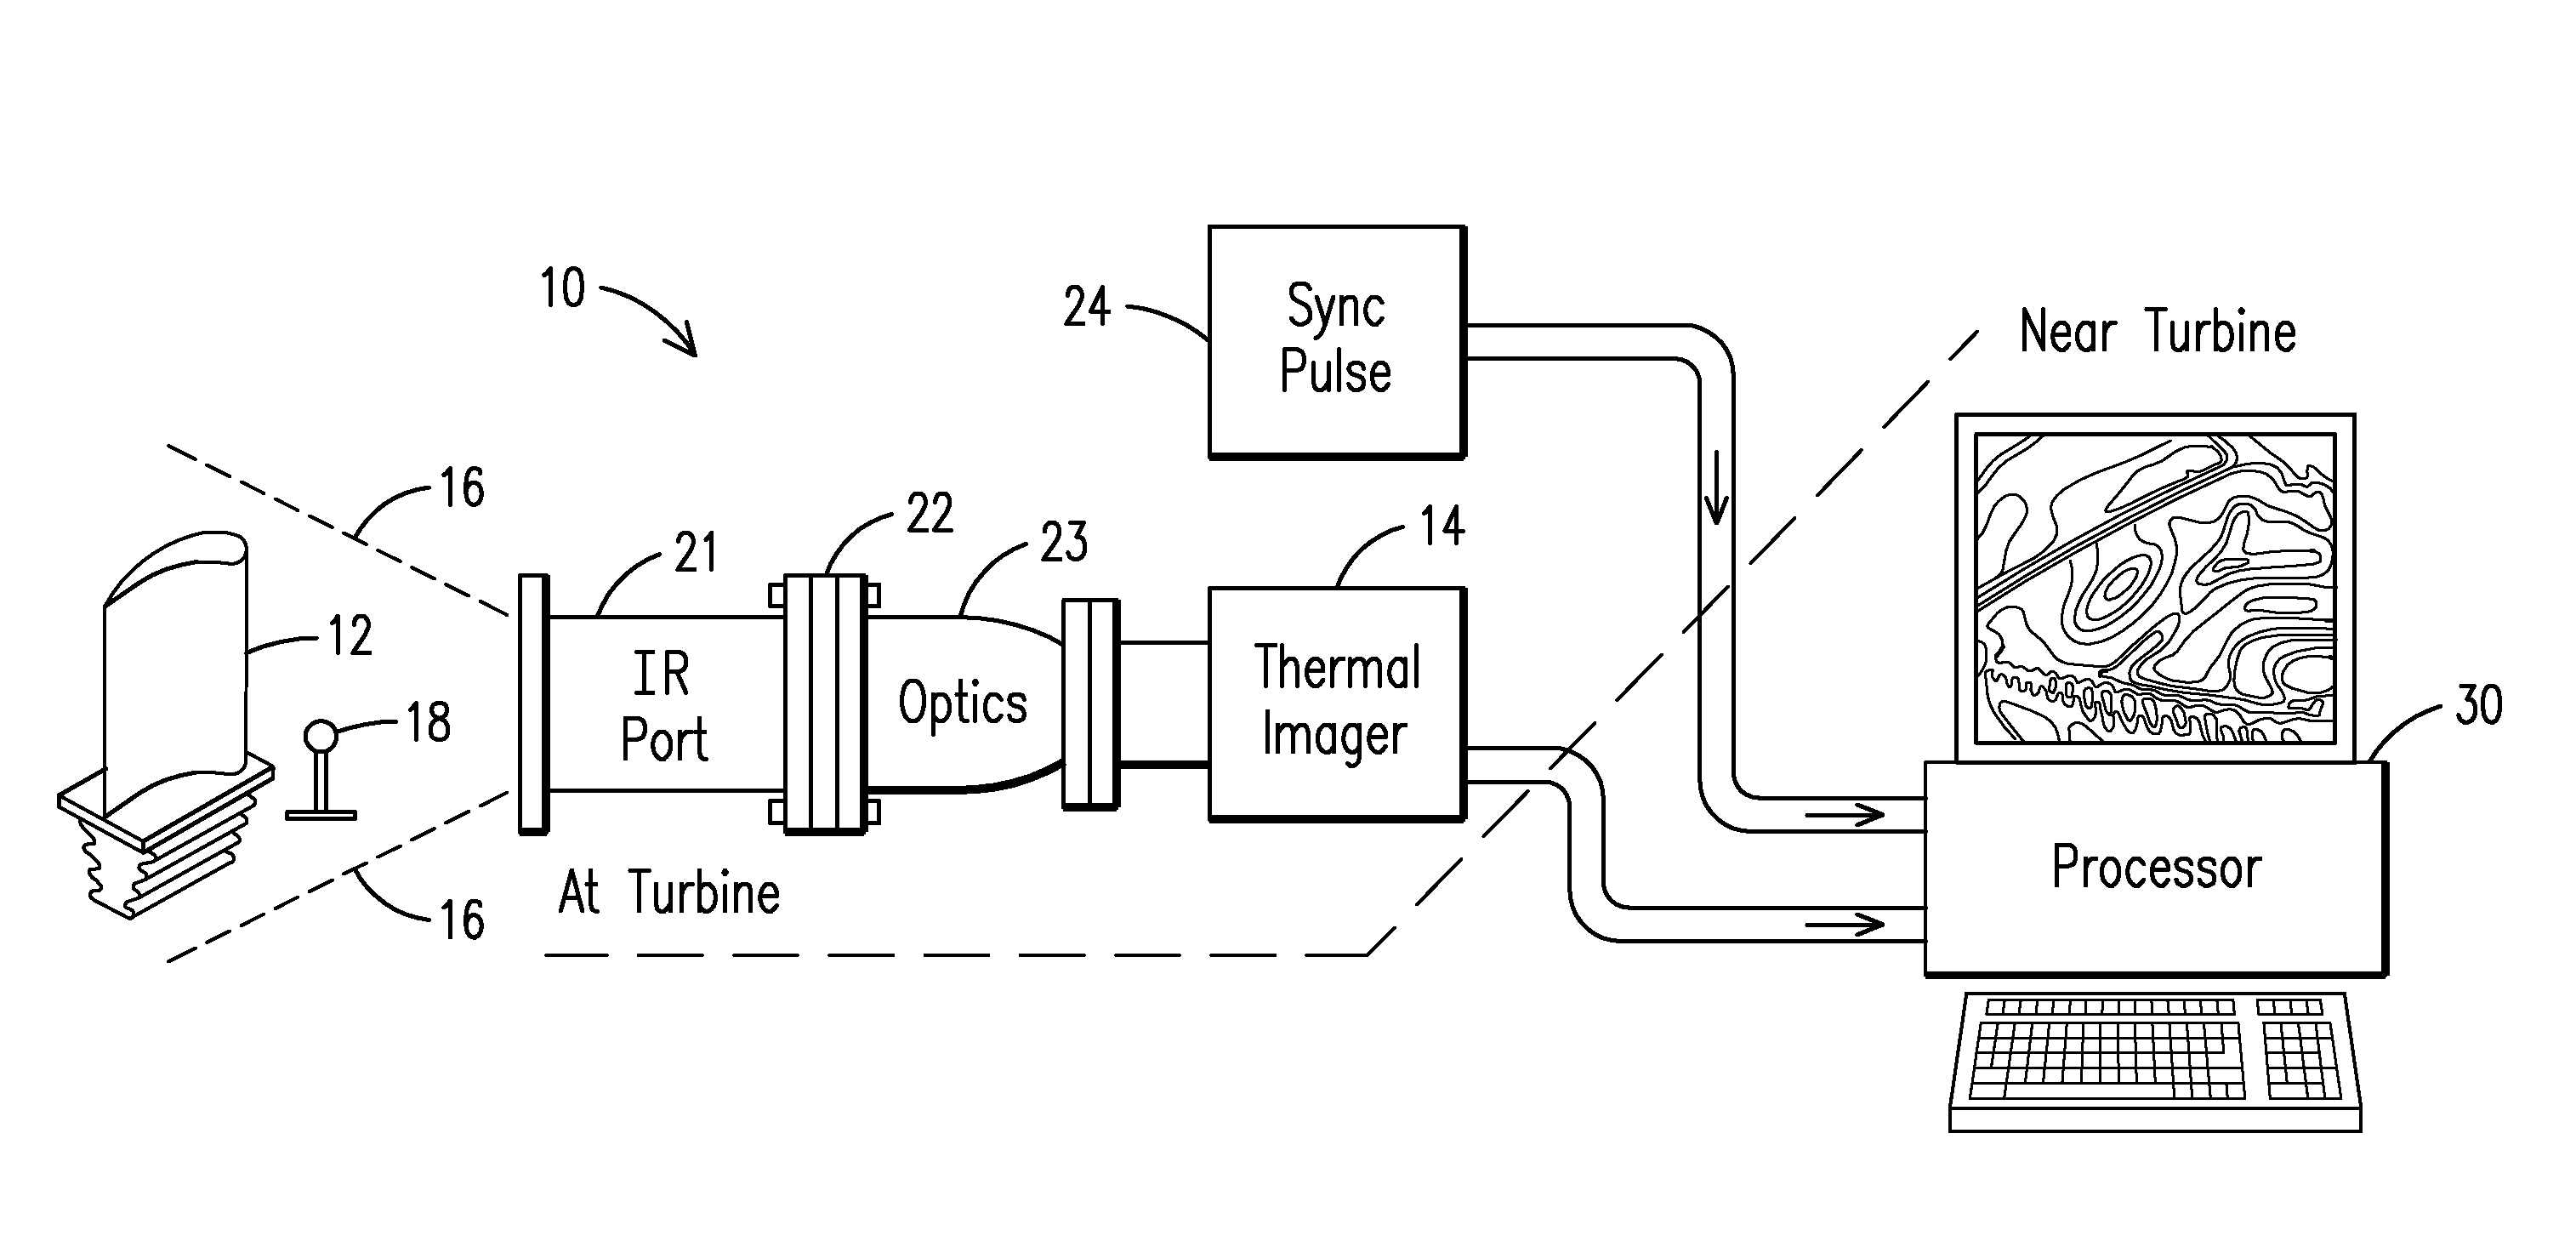 Apparatus and method for temperature mapping a rotating turbine component in a high temperature combustion environment